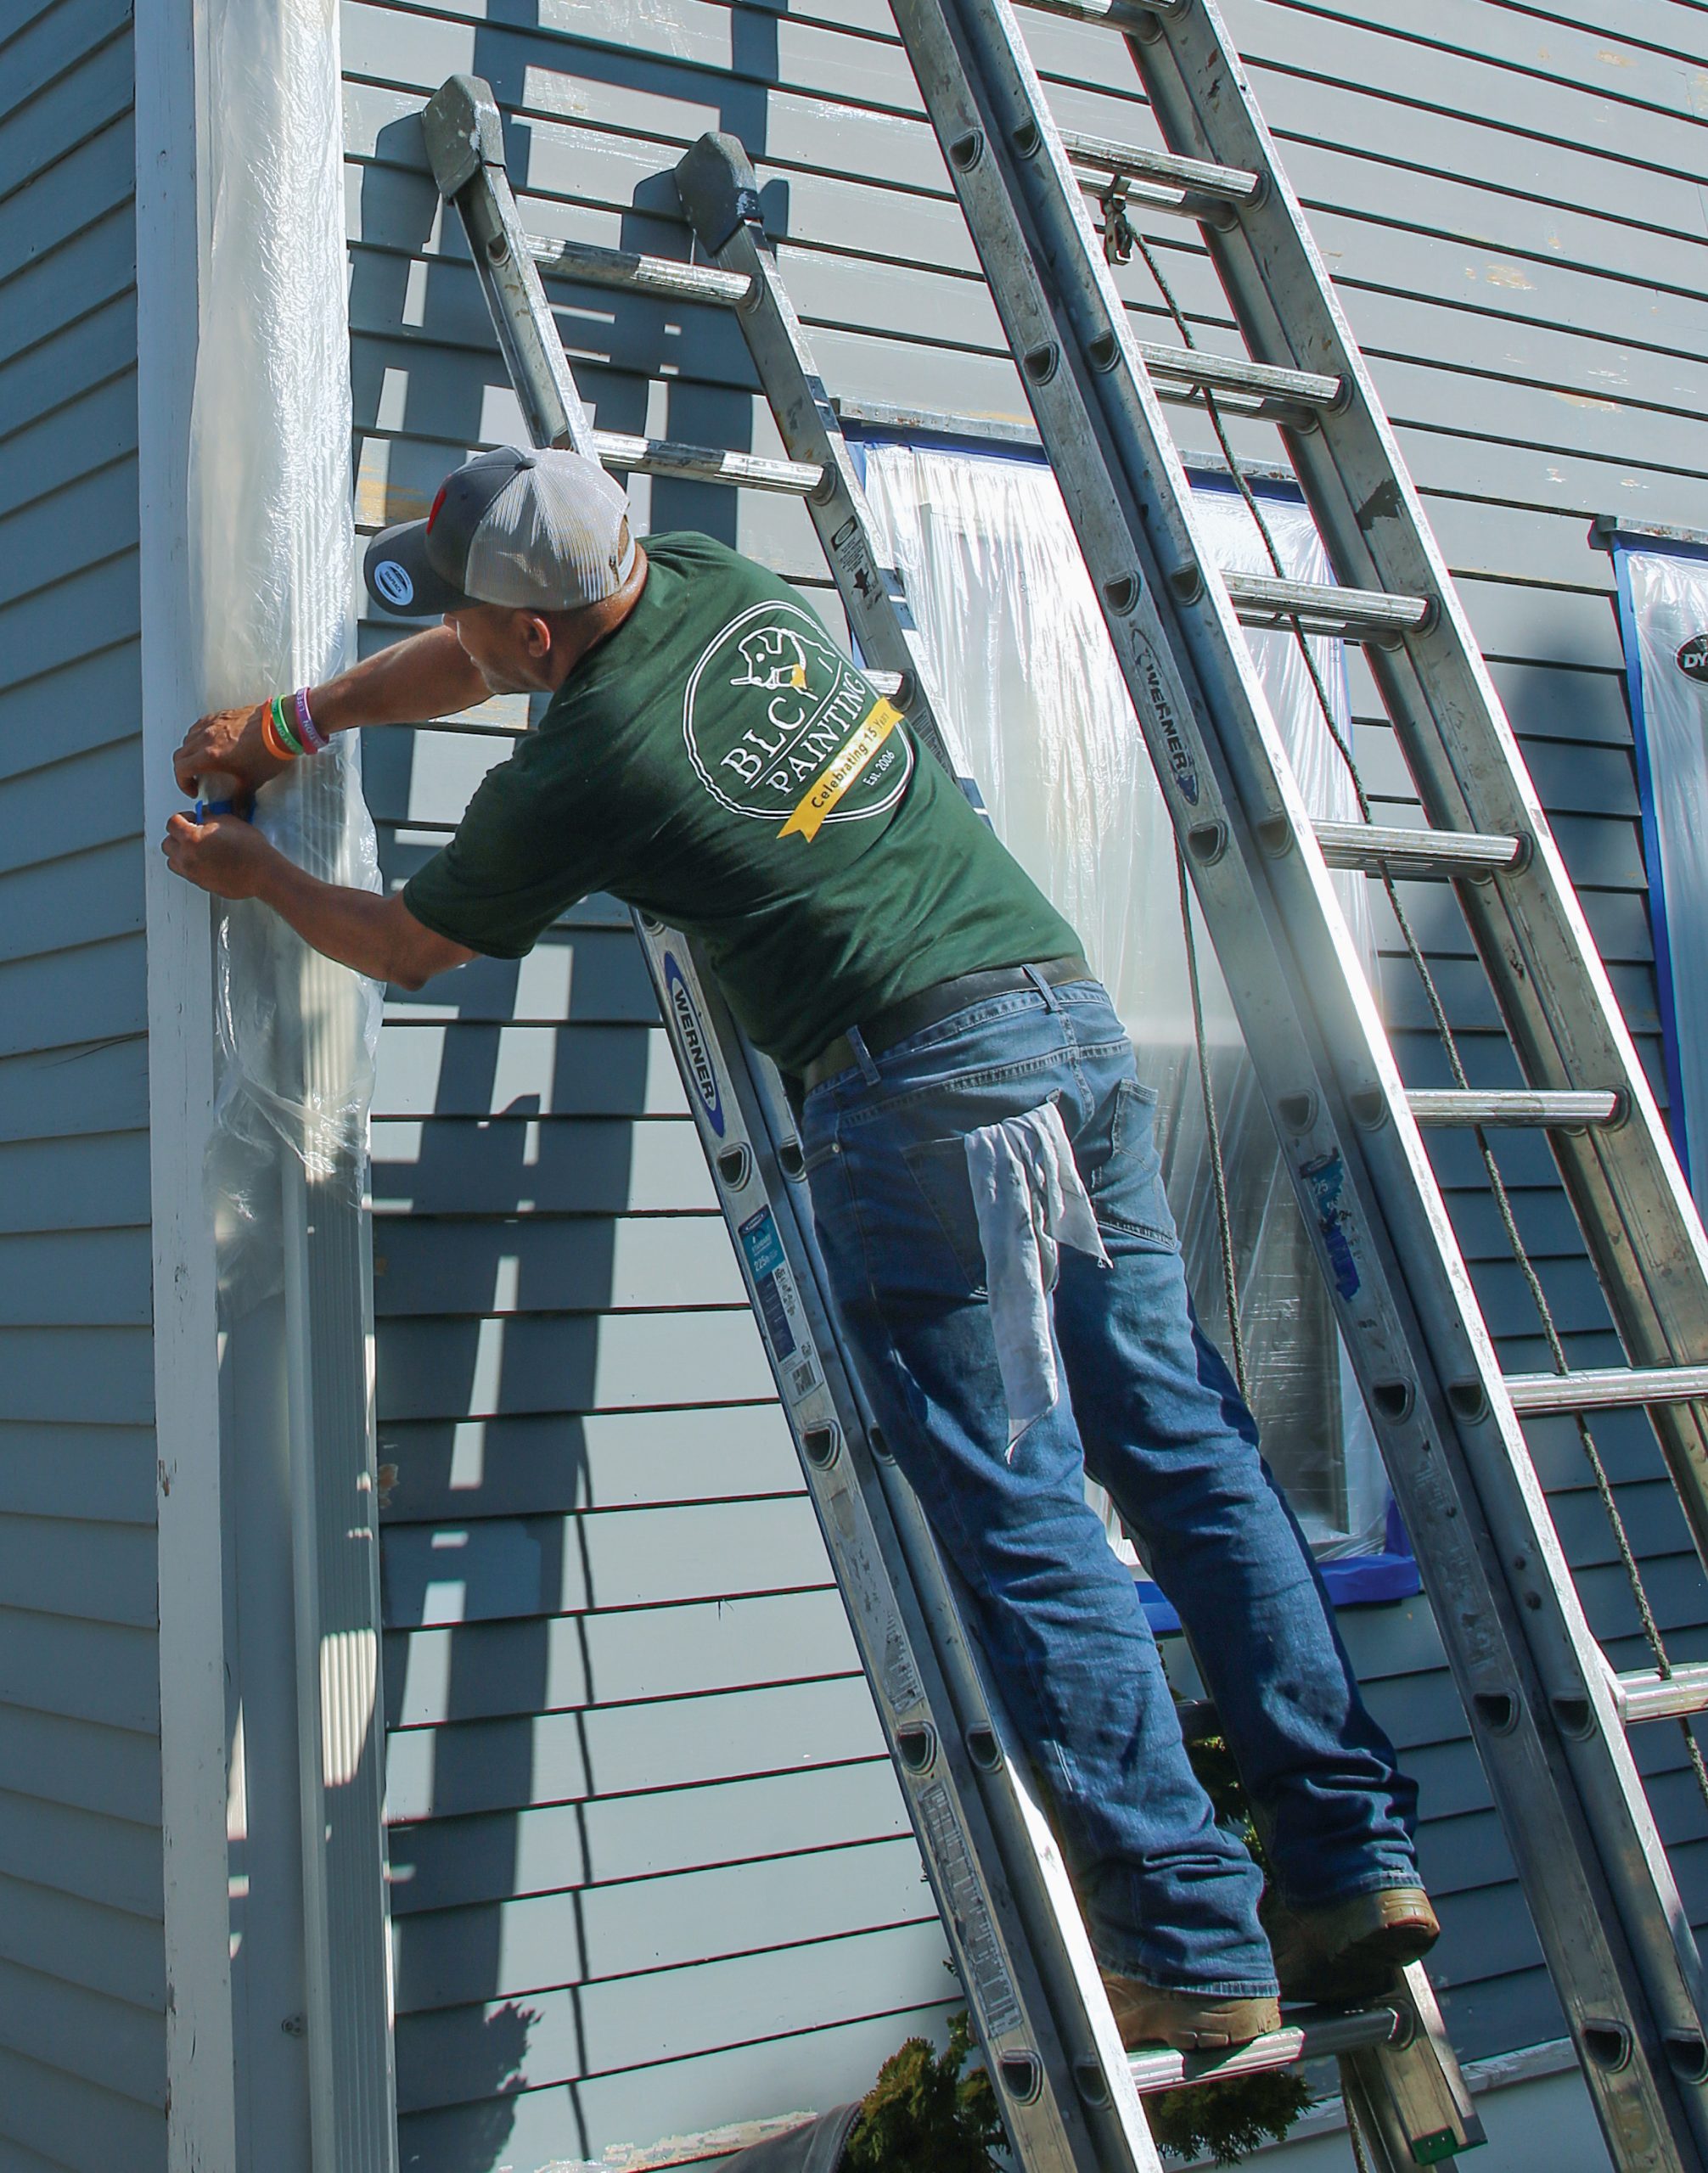 Gutters and downspouts. Removing downspouts makes painting easier, but most homeowners don’t want to add to the scope of the project, so we mask them. Ladder placement: Our procedures follow OSHAs 4-to-1 rule: With every 4 ft. of height, the ladder is extended 1 ft. away from the house.